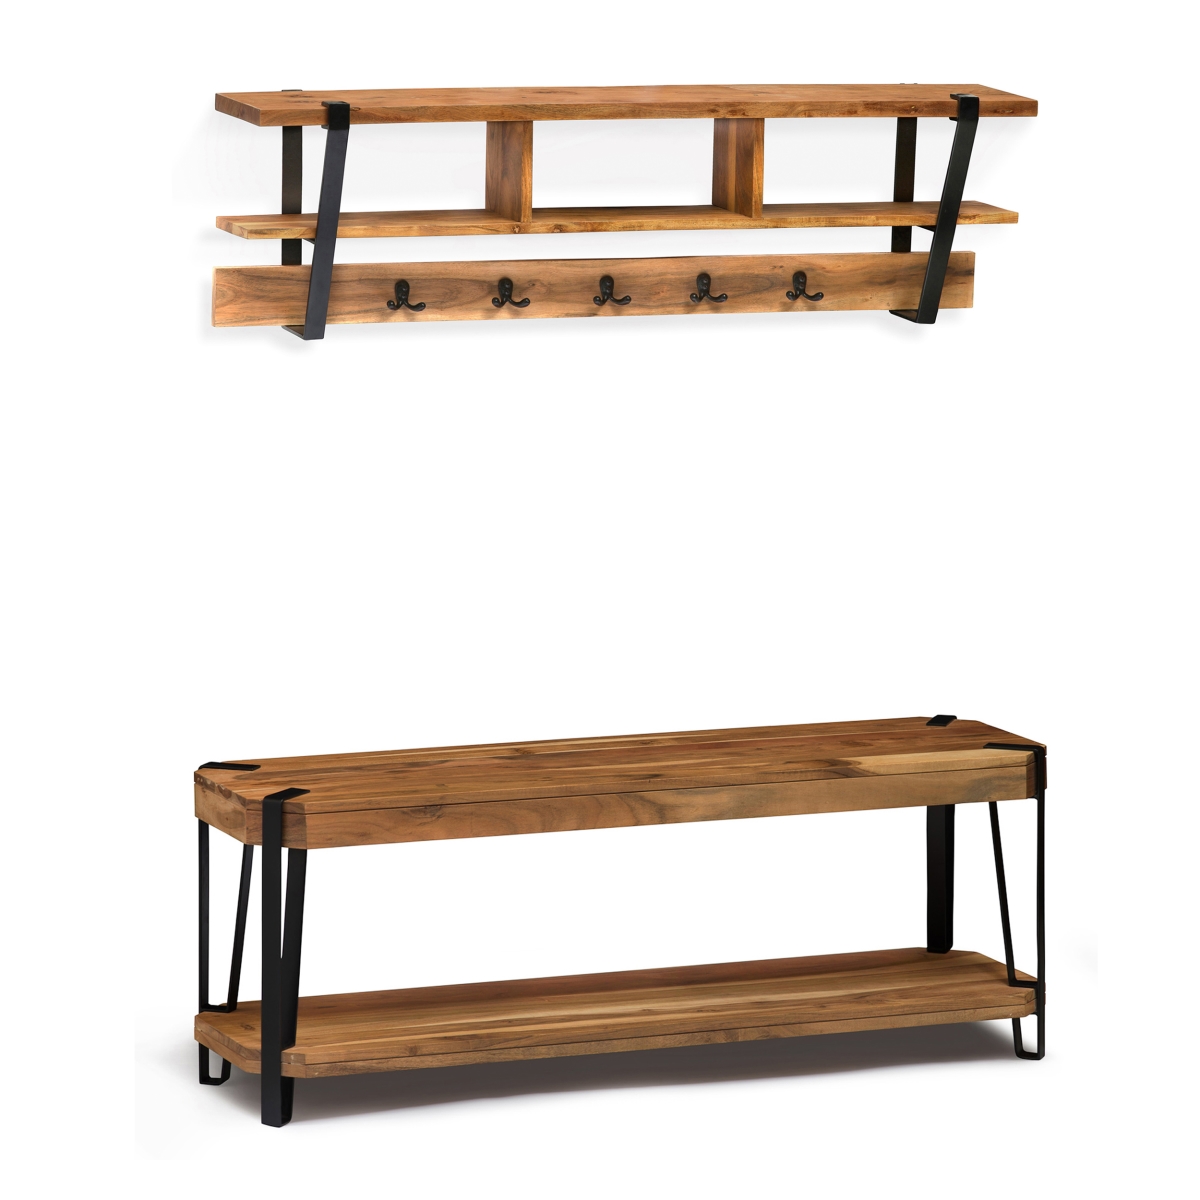 Picture of Alaterre AWCC042420 48 in. Ryegate Natural Live Edge Bench with Coat Hook Shelf Set